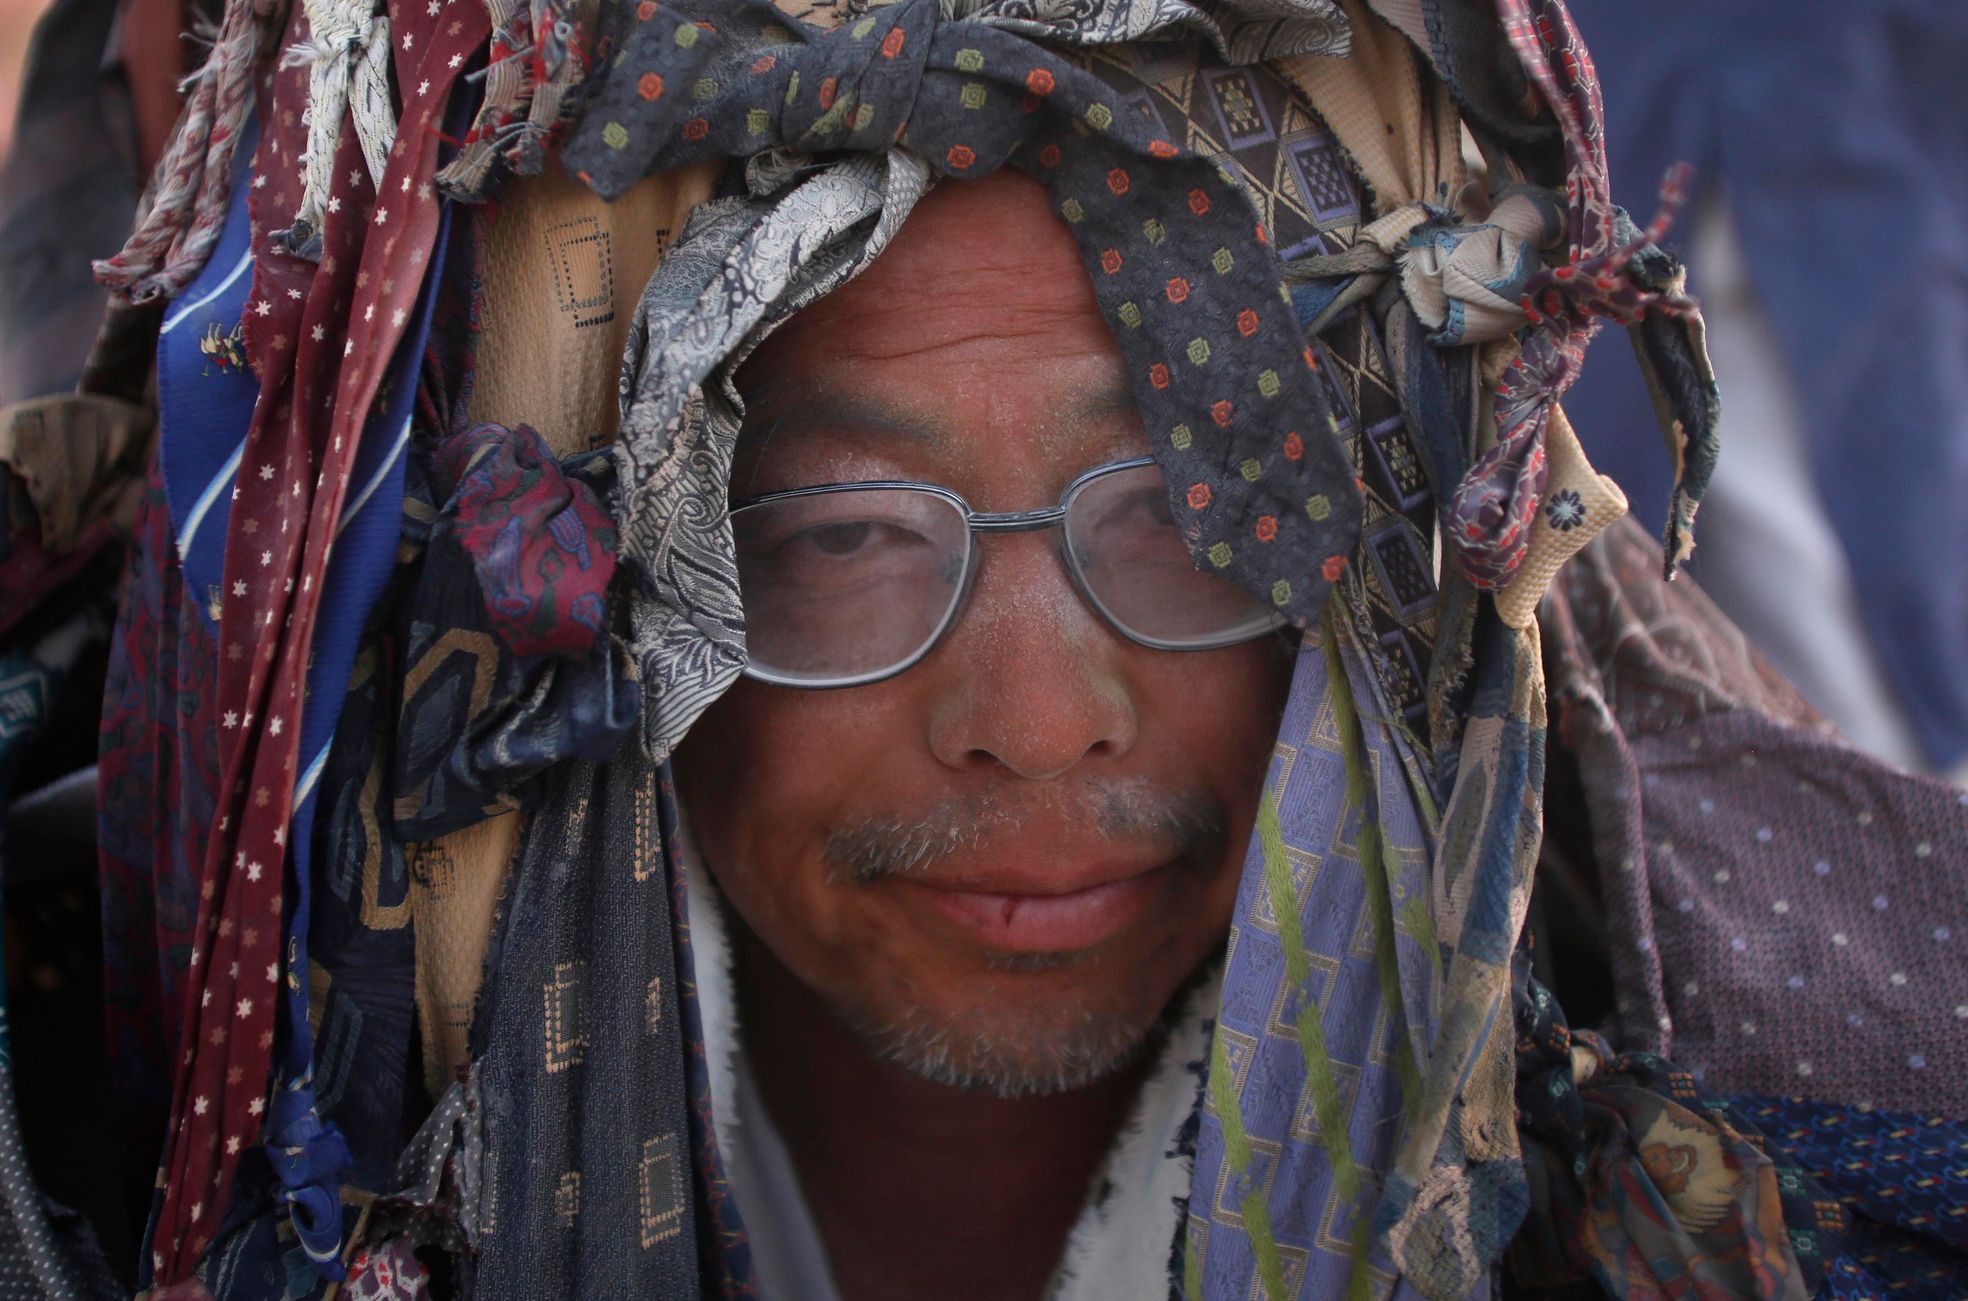 Furuki Takeshi waits for the Man to burn during the Burning Man 2014 &quot;Caravansary&quot; arts and music festival in the Black Rock Desert of Nevada